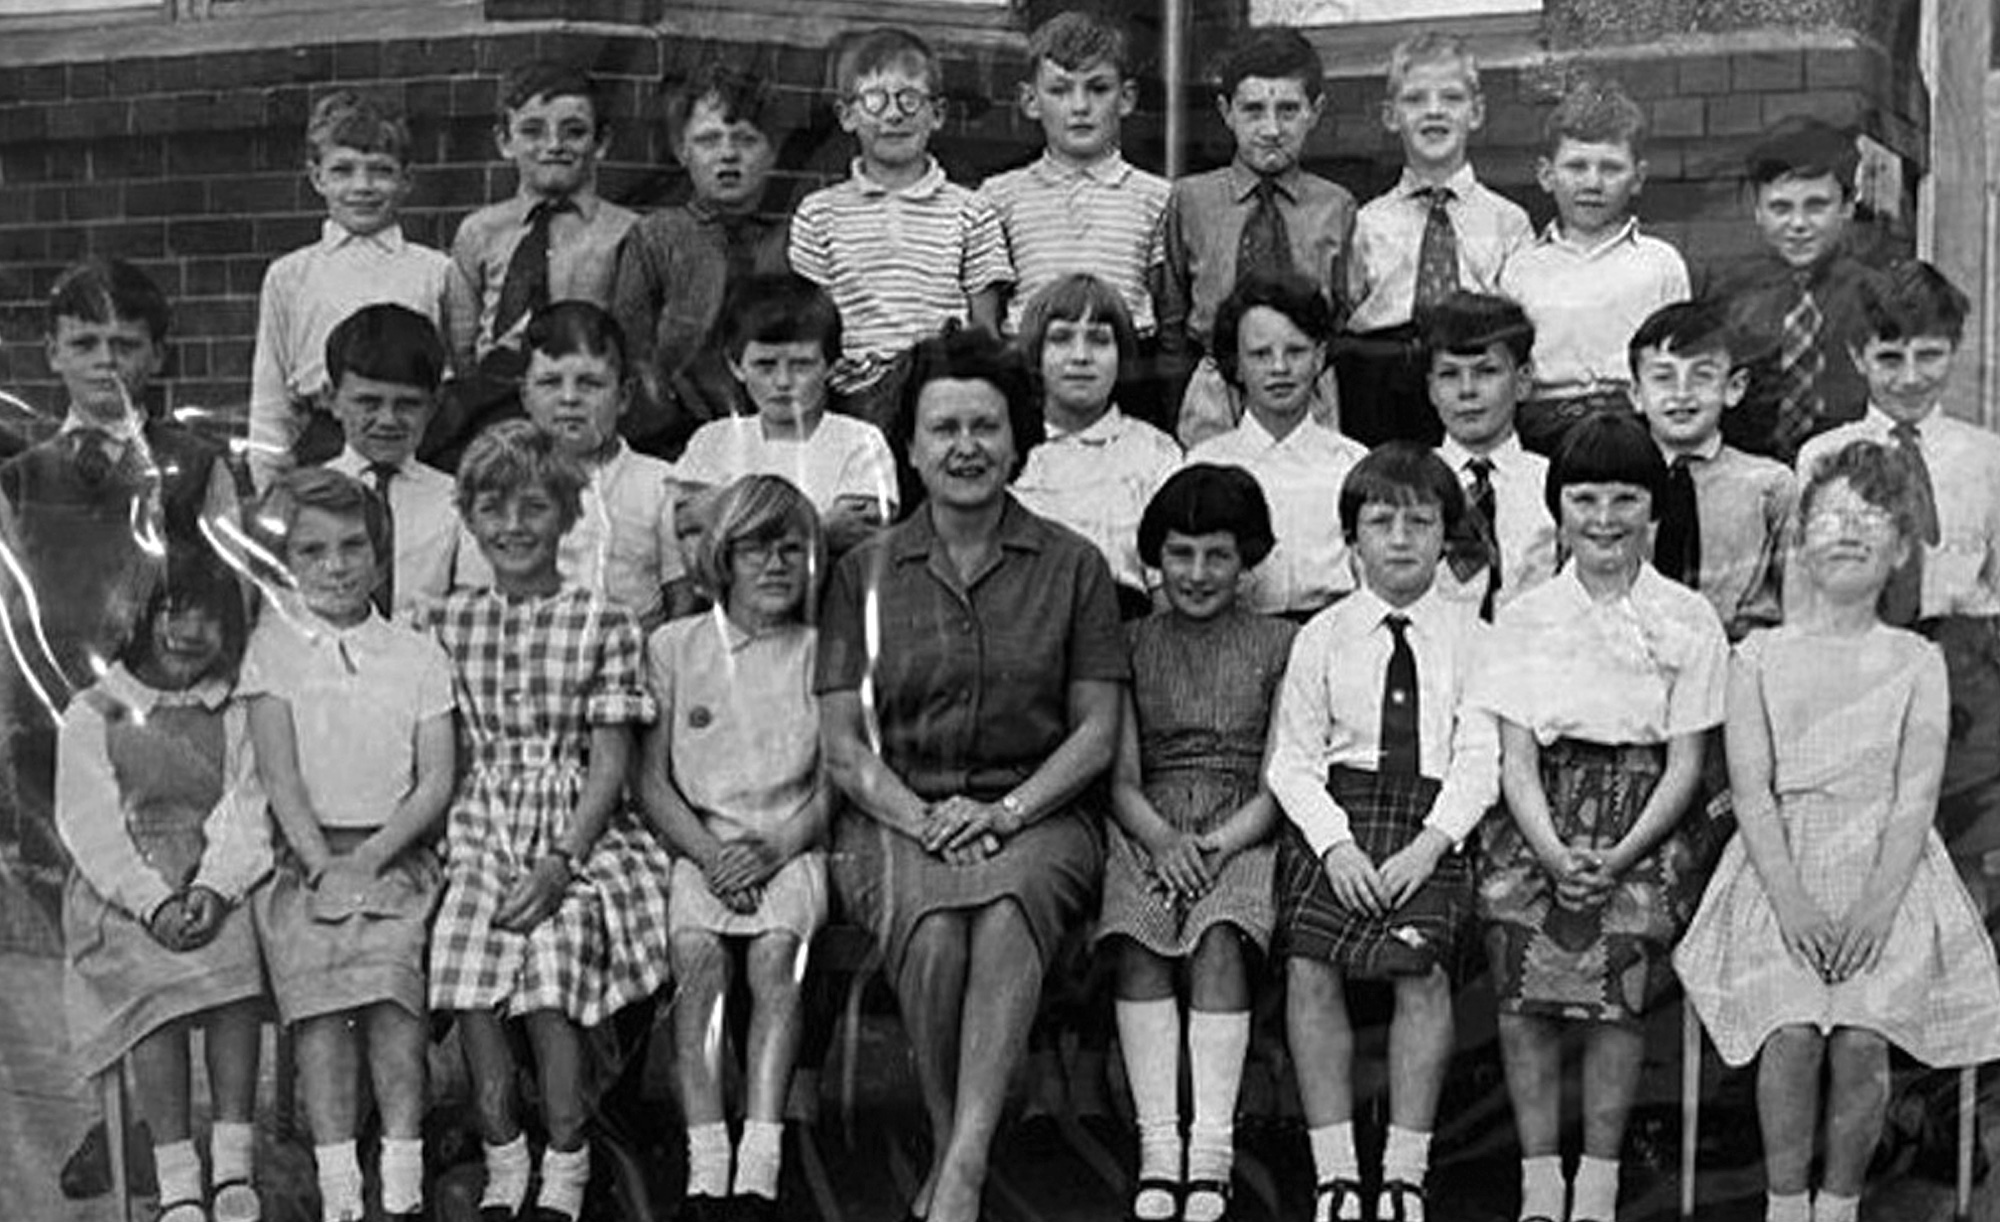 Walbottle Primary class of 1964-65, courtesy of Brian Bennet